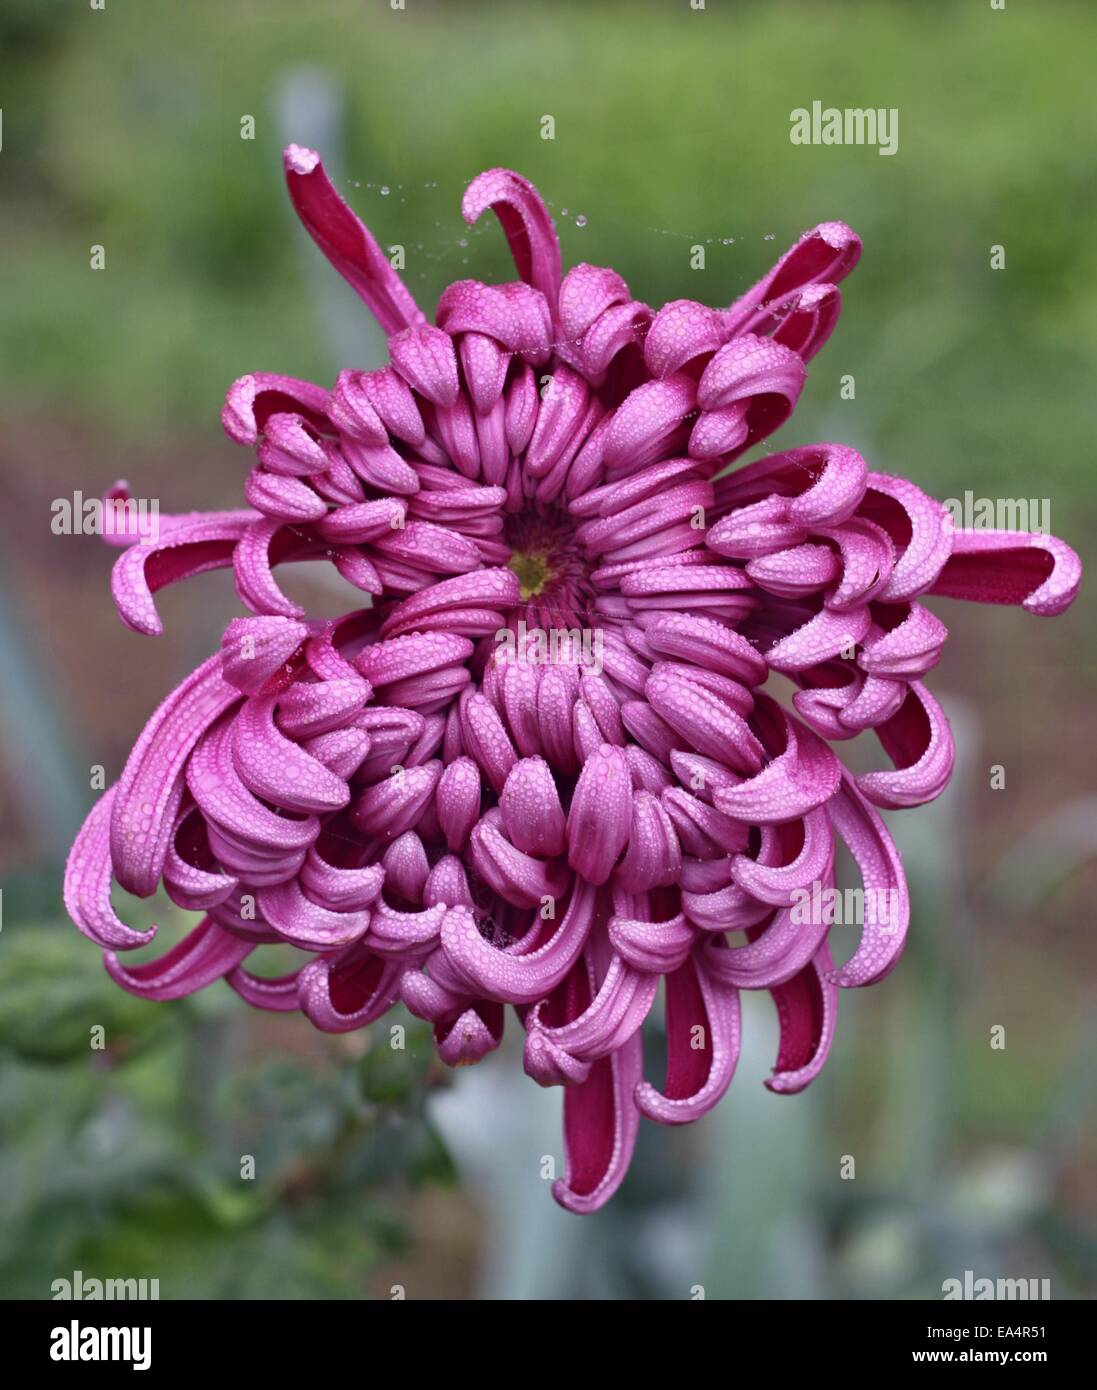 Violet dahlia in the rain and green background Stock Photo